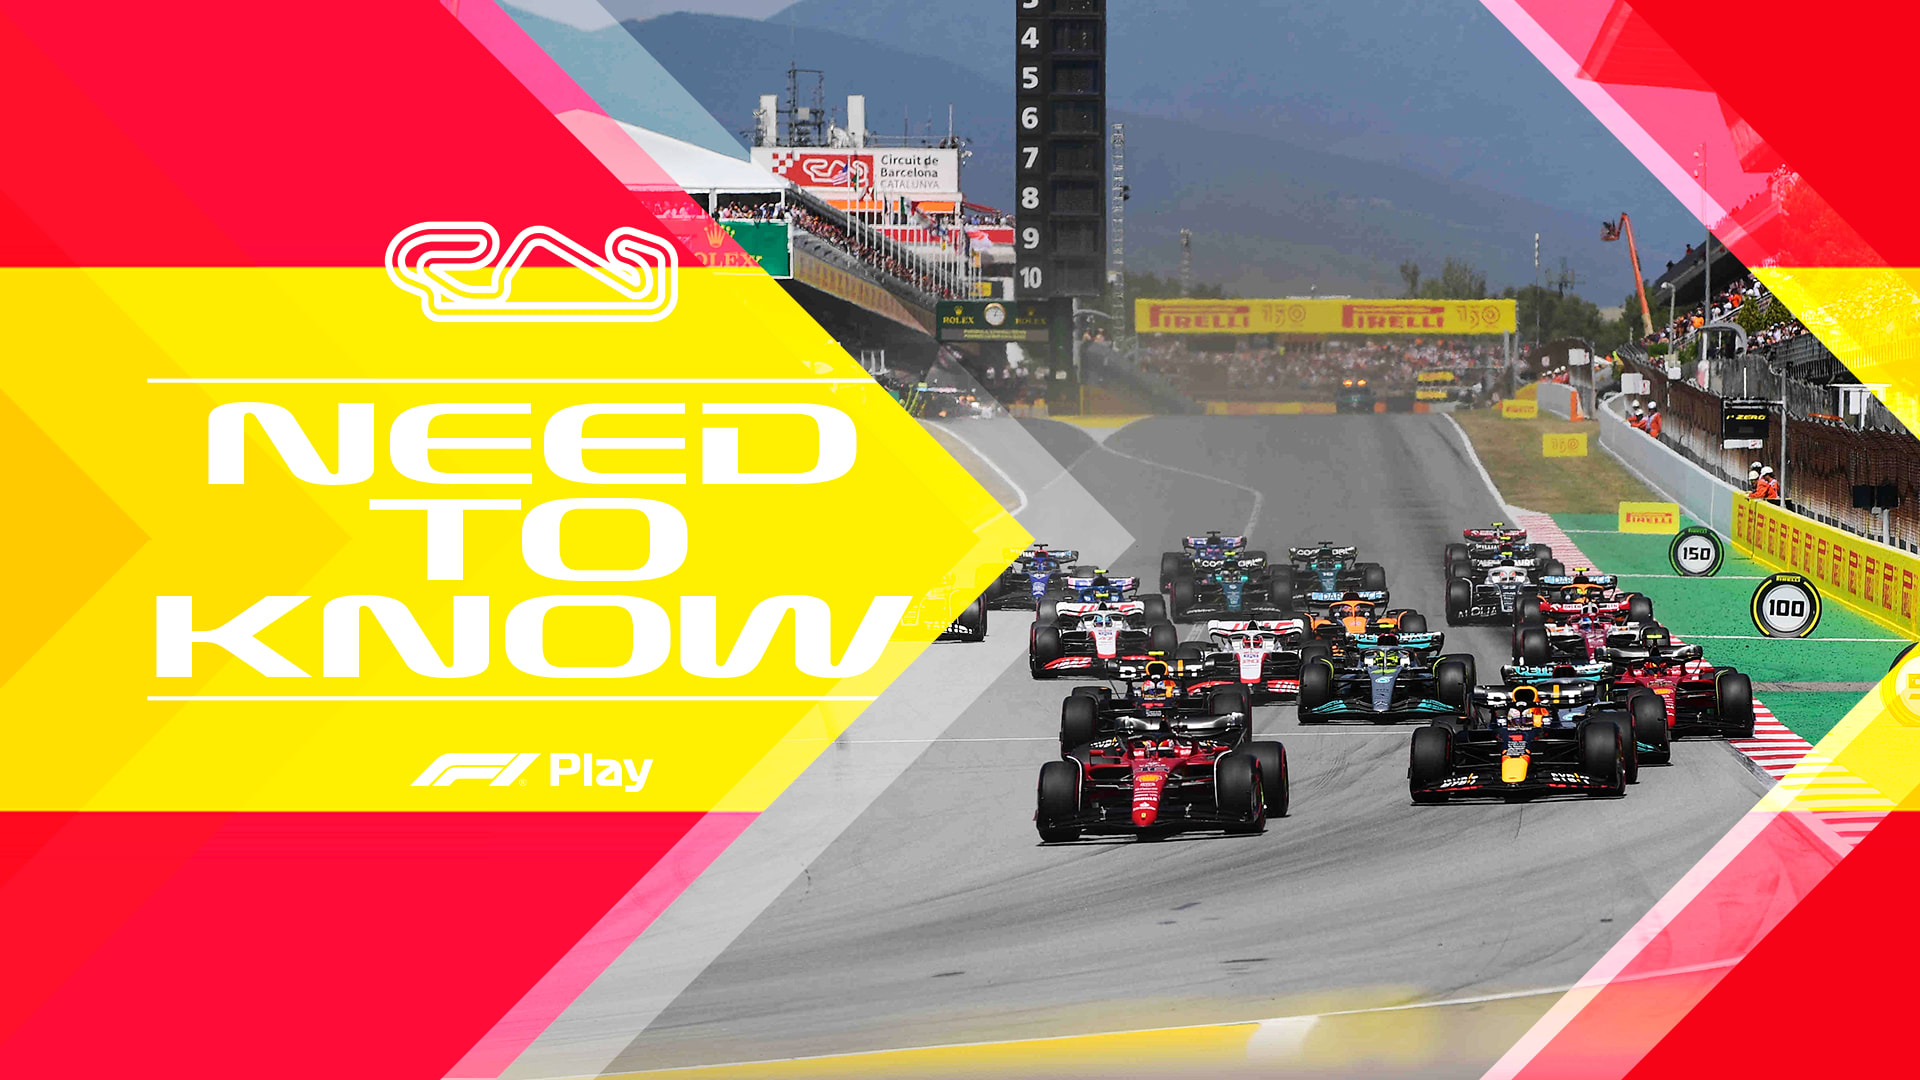 NEED TO KNOW The most important facts, stats and trivia ahead of the 2023 Spanish Grand Prix Formula 1®